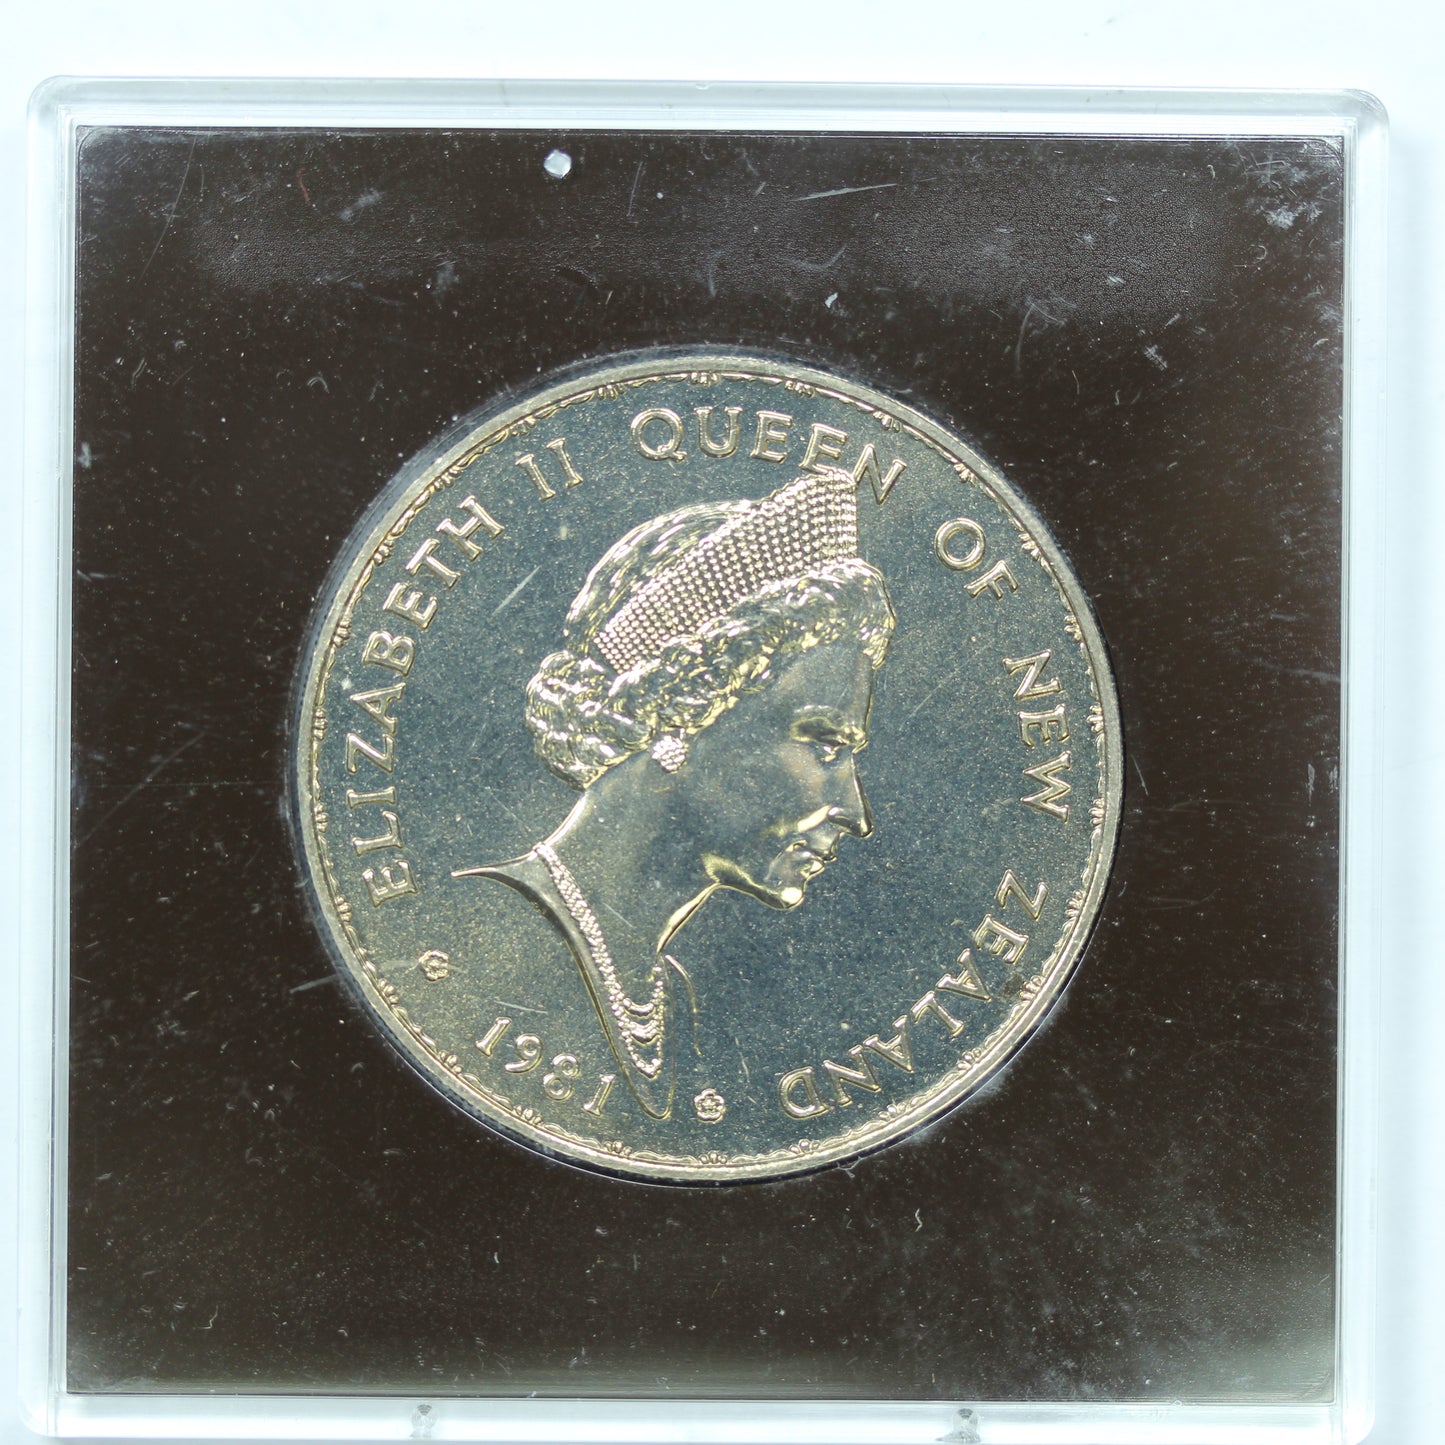 1981 New Zealand NZ $1 Coin Royal Visit BU in Perspex Case